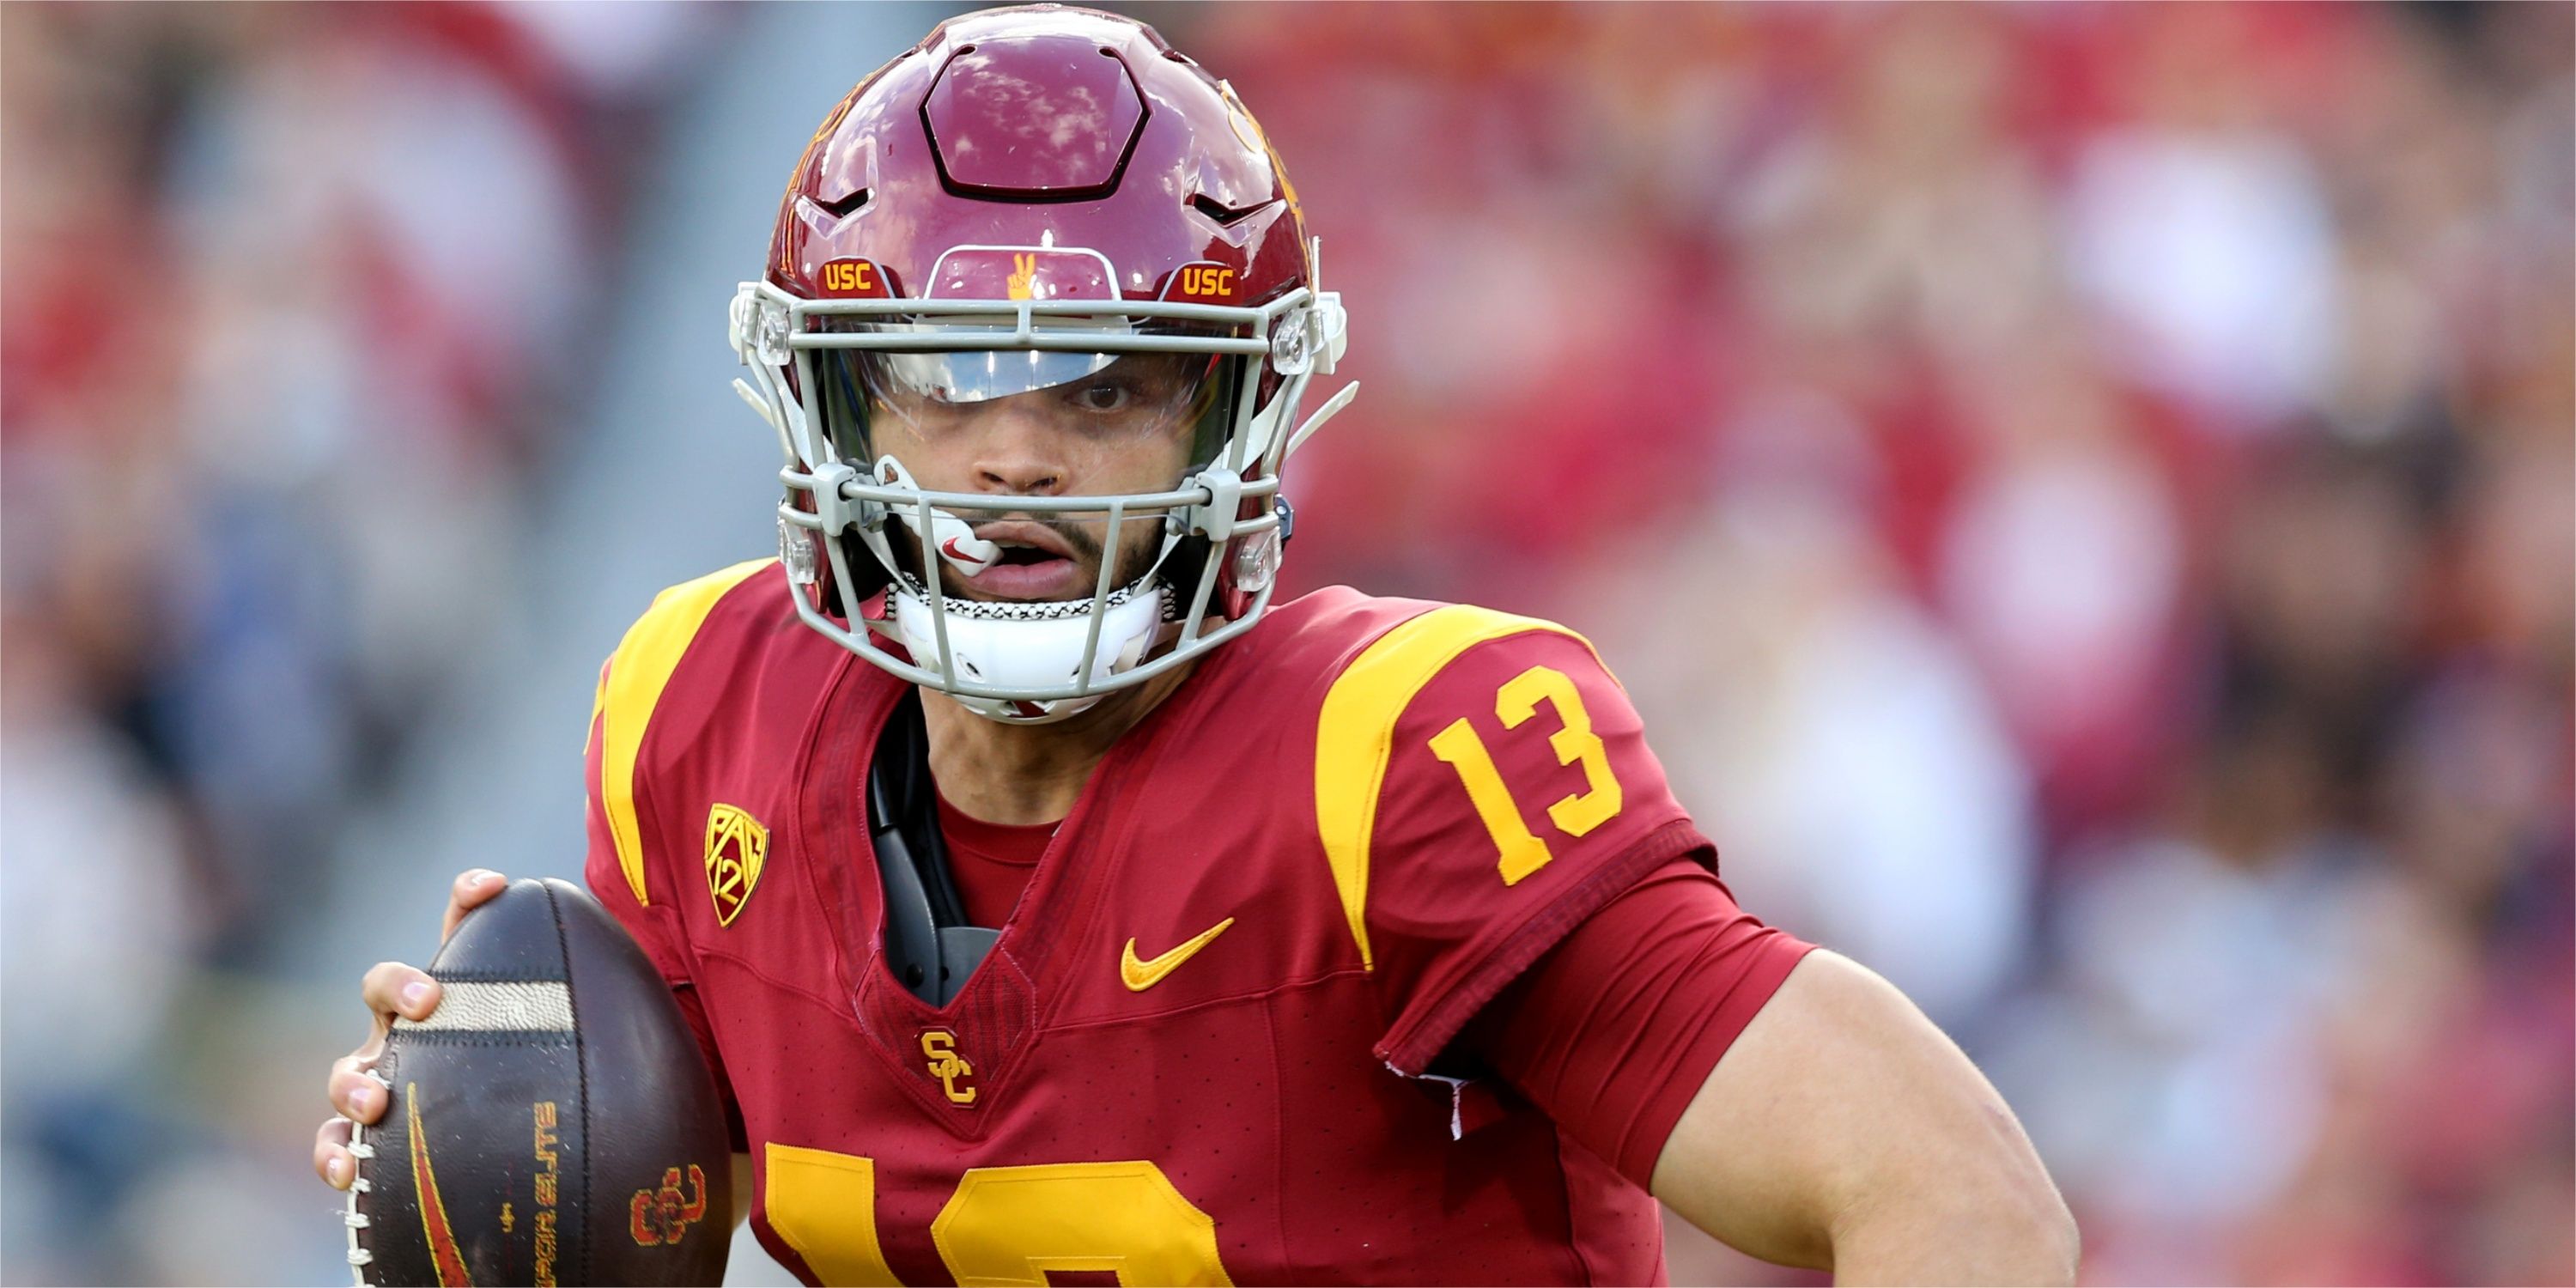 Caleb Williams drops back to pass for USC 